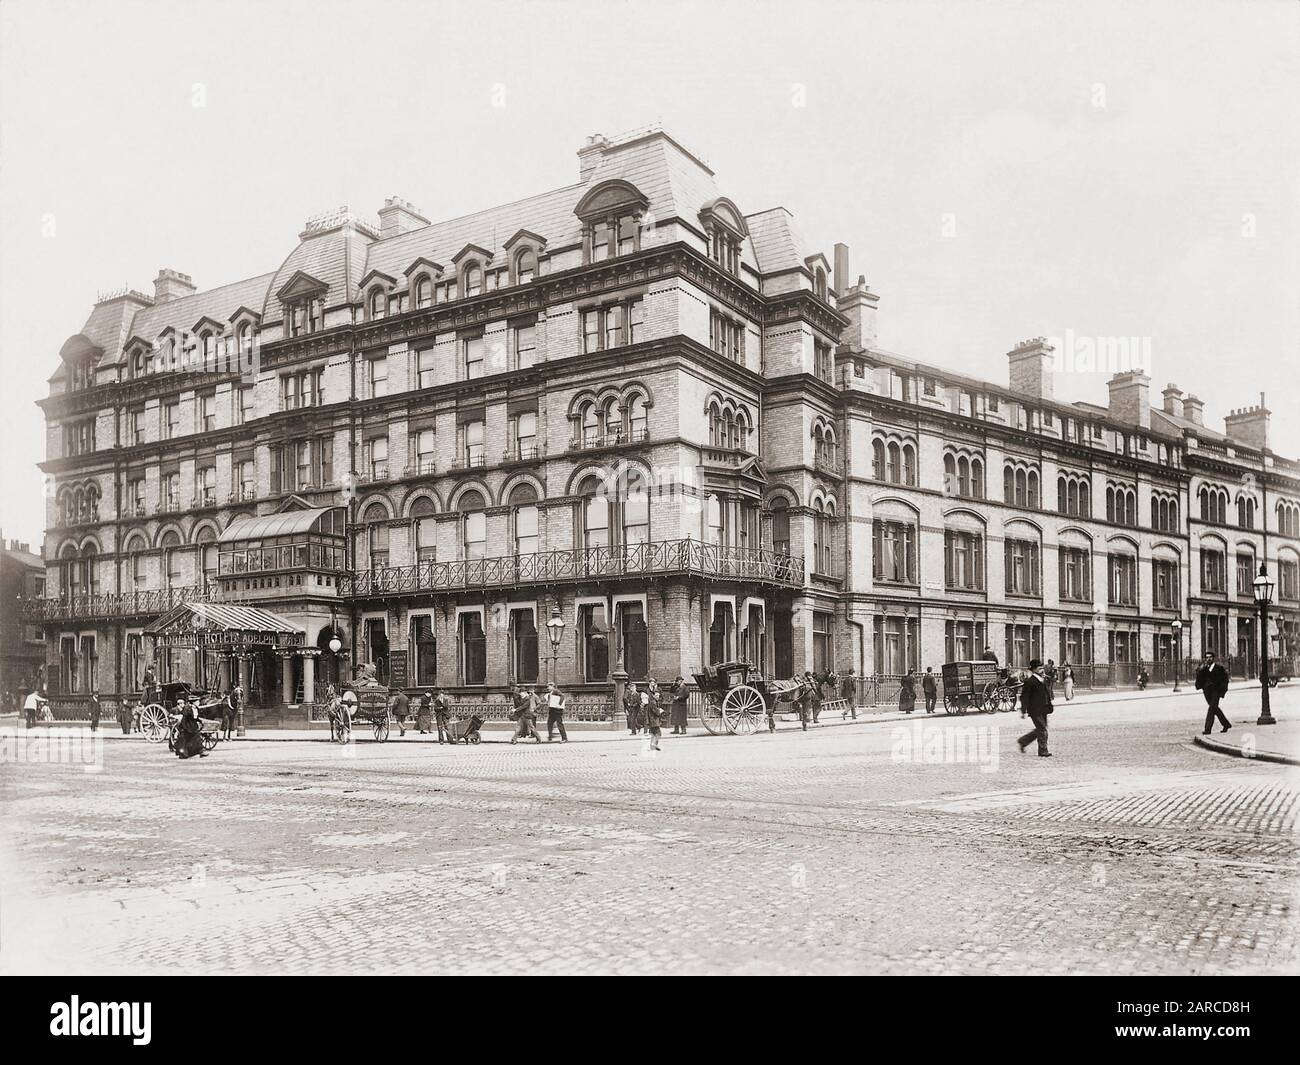 The Adelphi Hotel, Ranelagh Place, Liverpool, England, seen here in late 19th century.  It was bought in 1892 by the Midland Railway and renamed the Midland Adelphi. Stock Photo